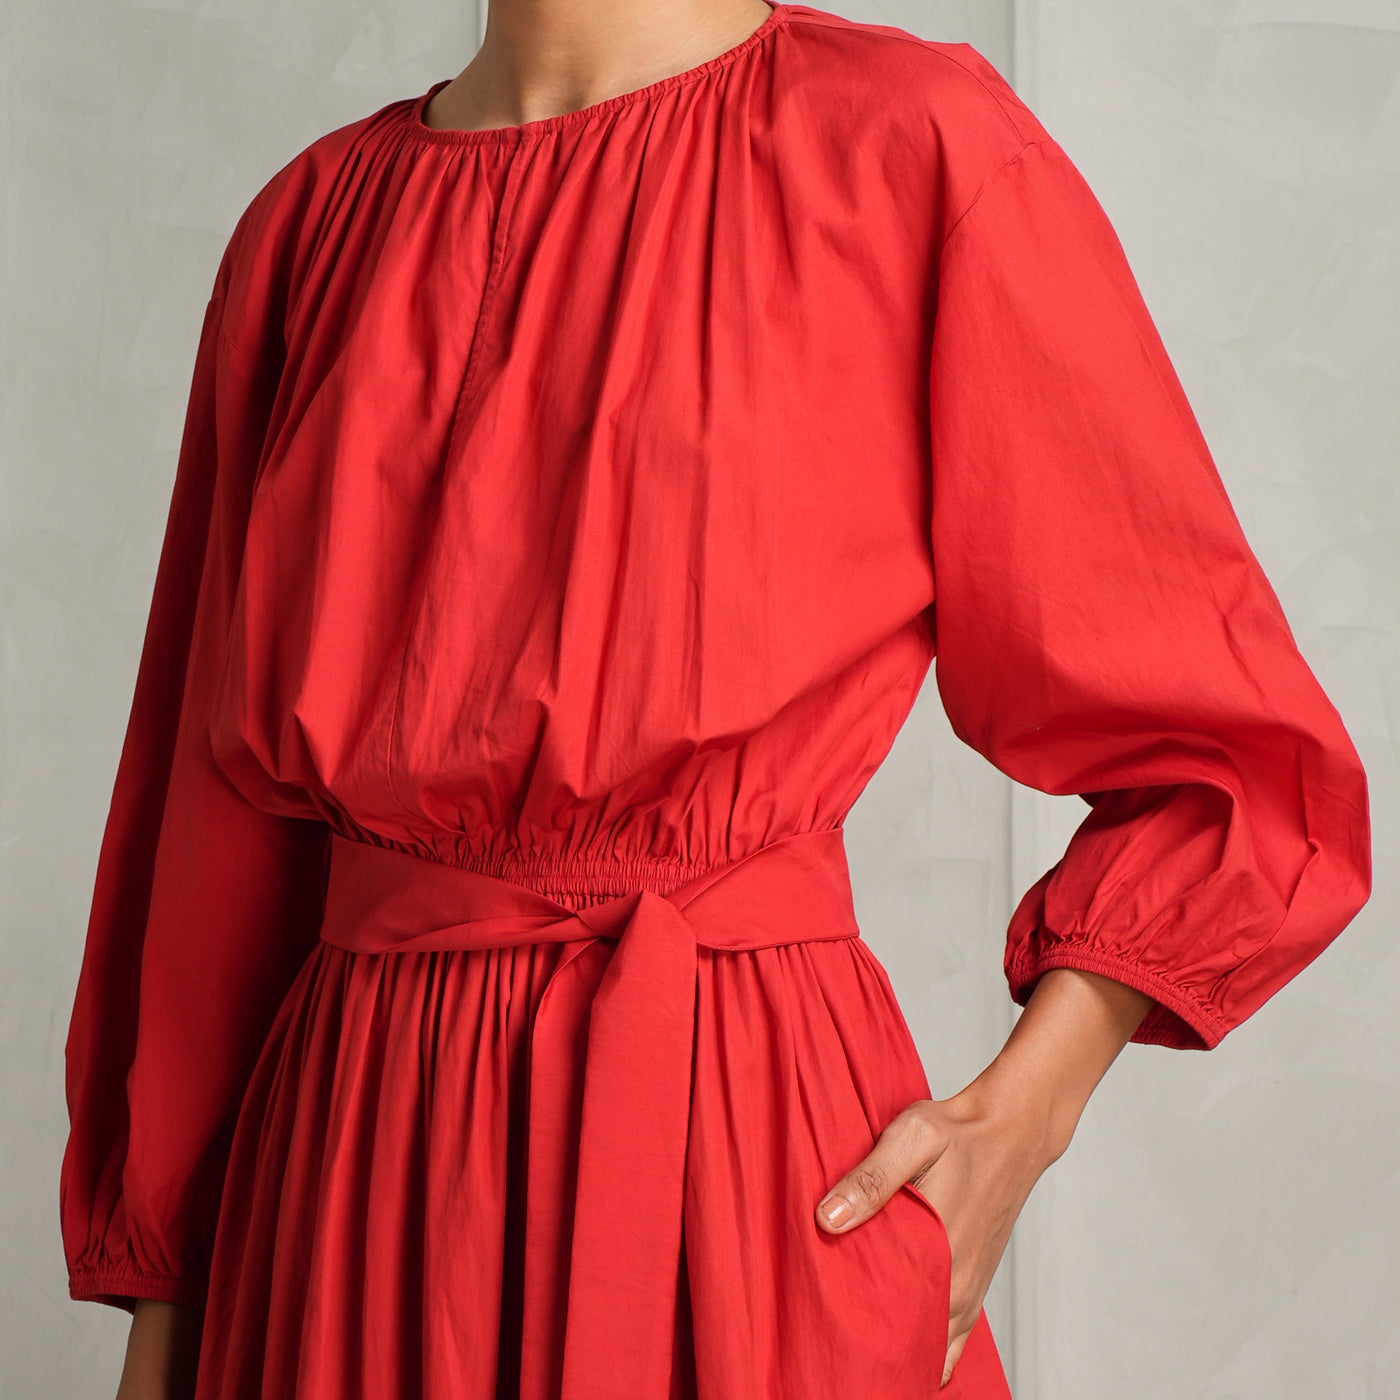 Aish Life red belted dress